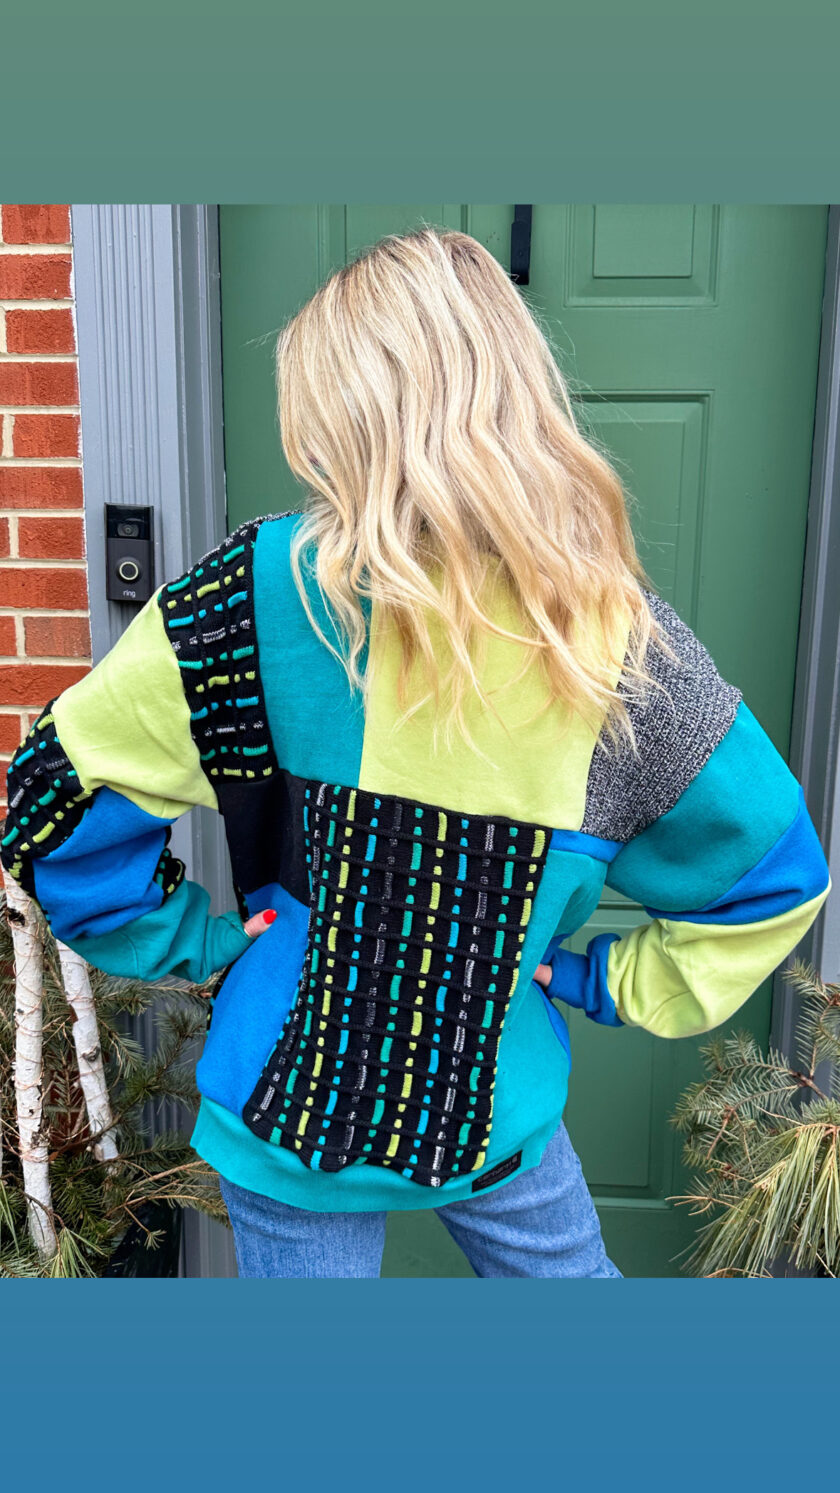 A woman is standing in front of a door wearing a colorful sweater.